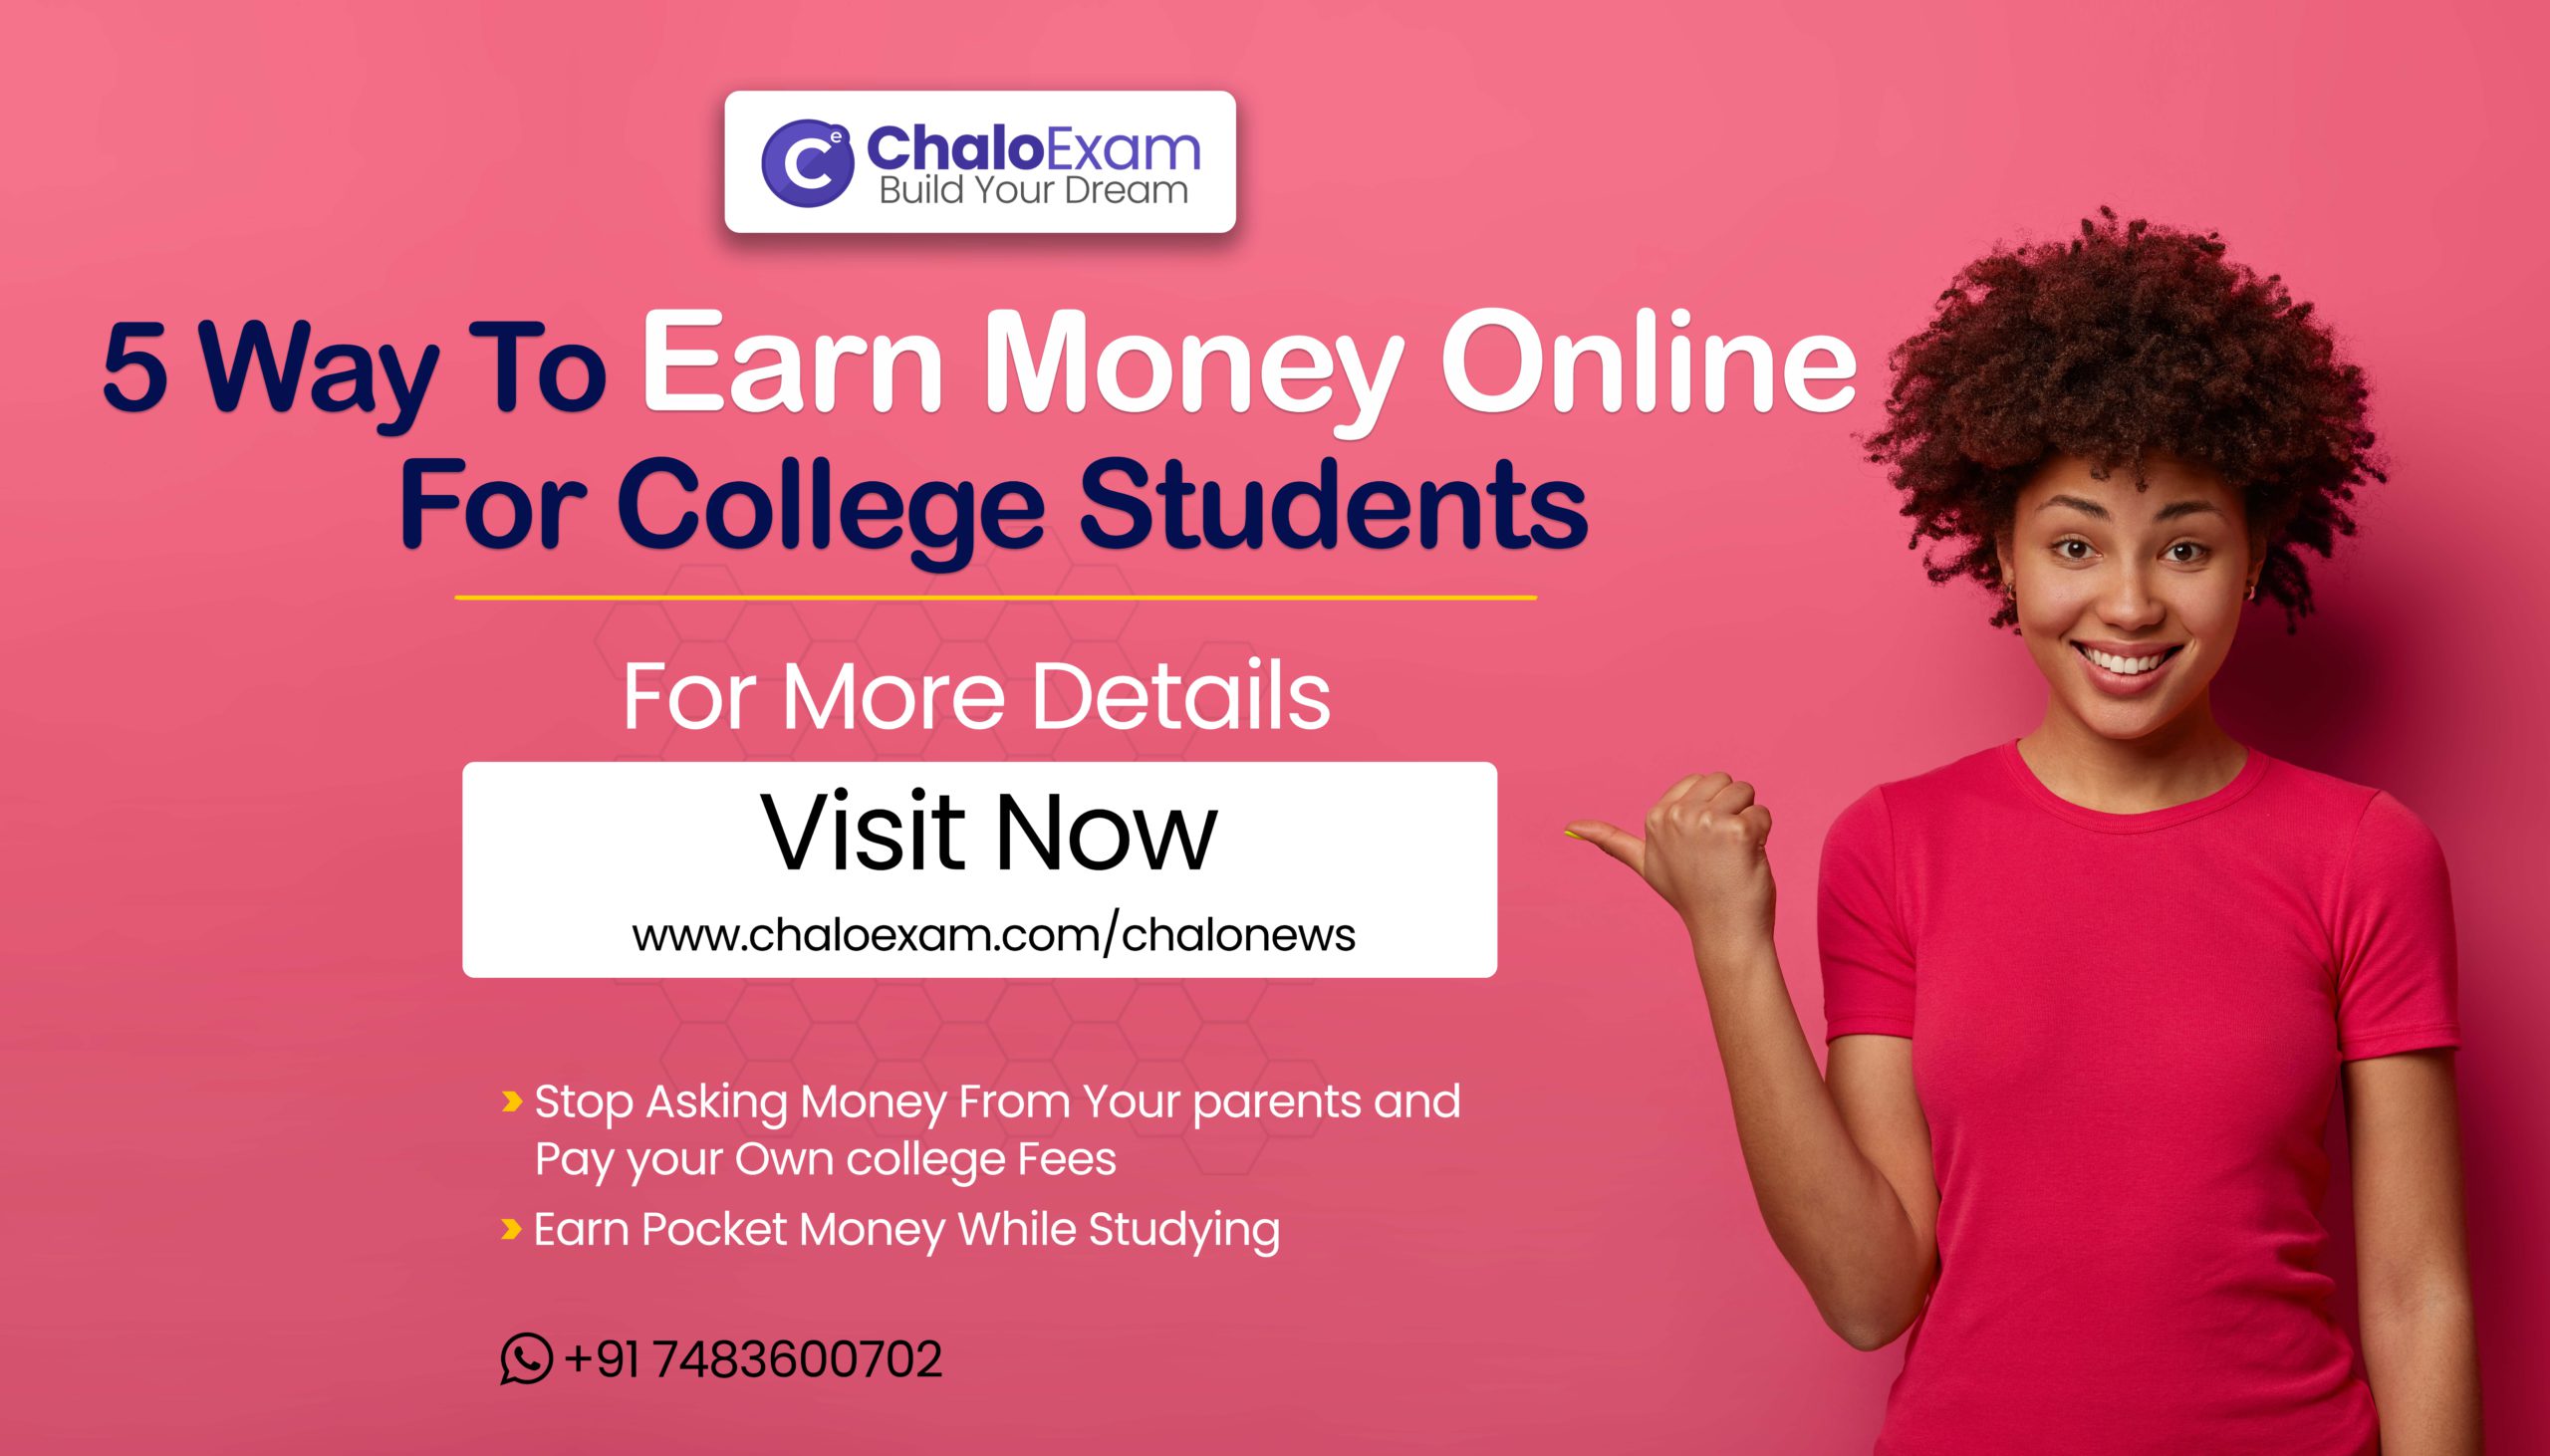 How to Earn Money For College Students From Chaloexam